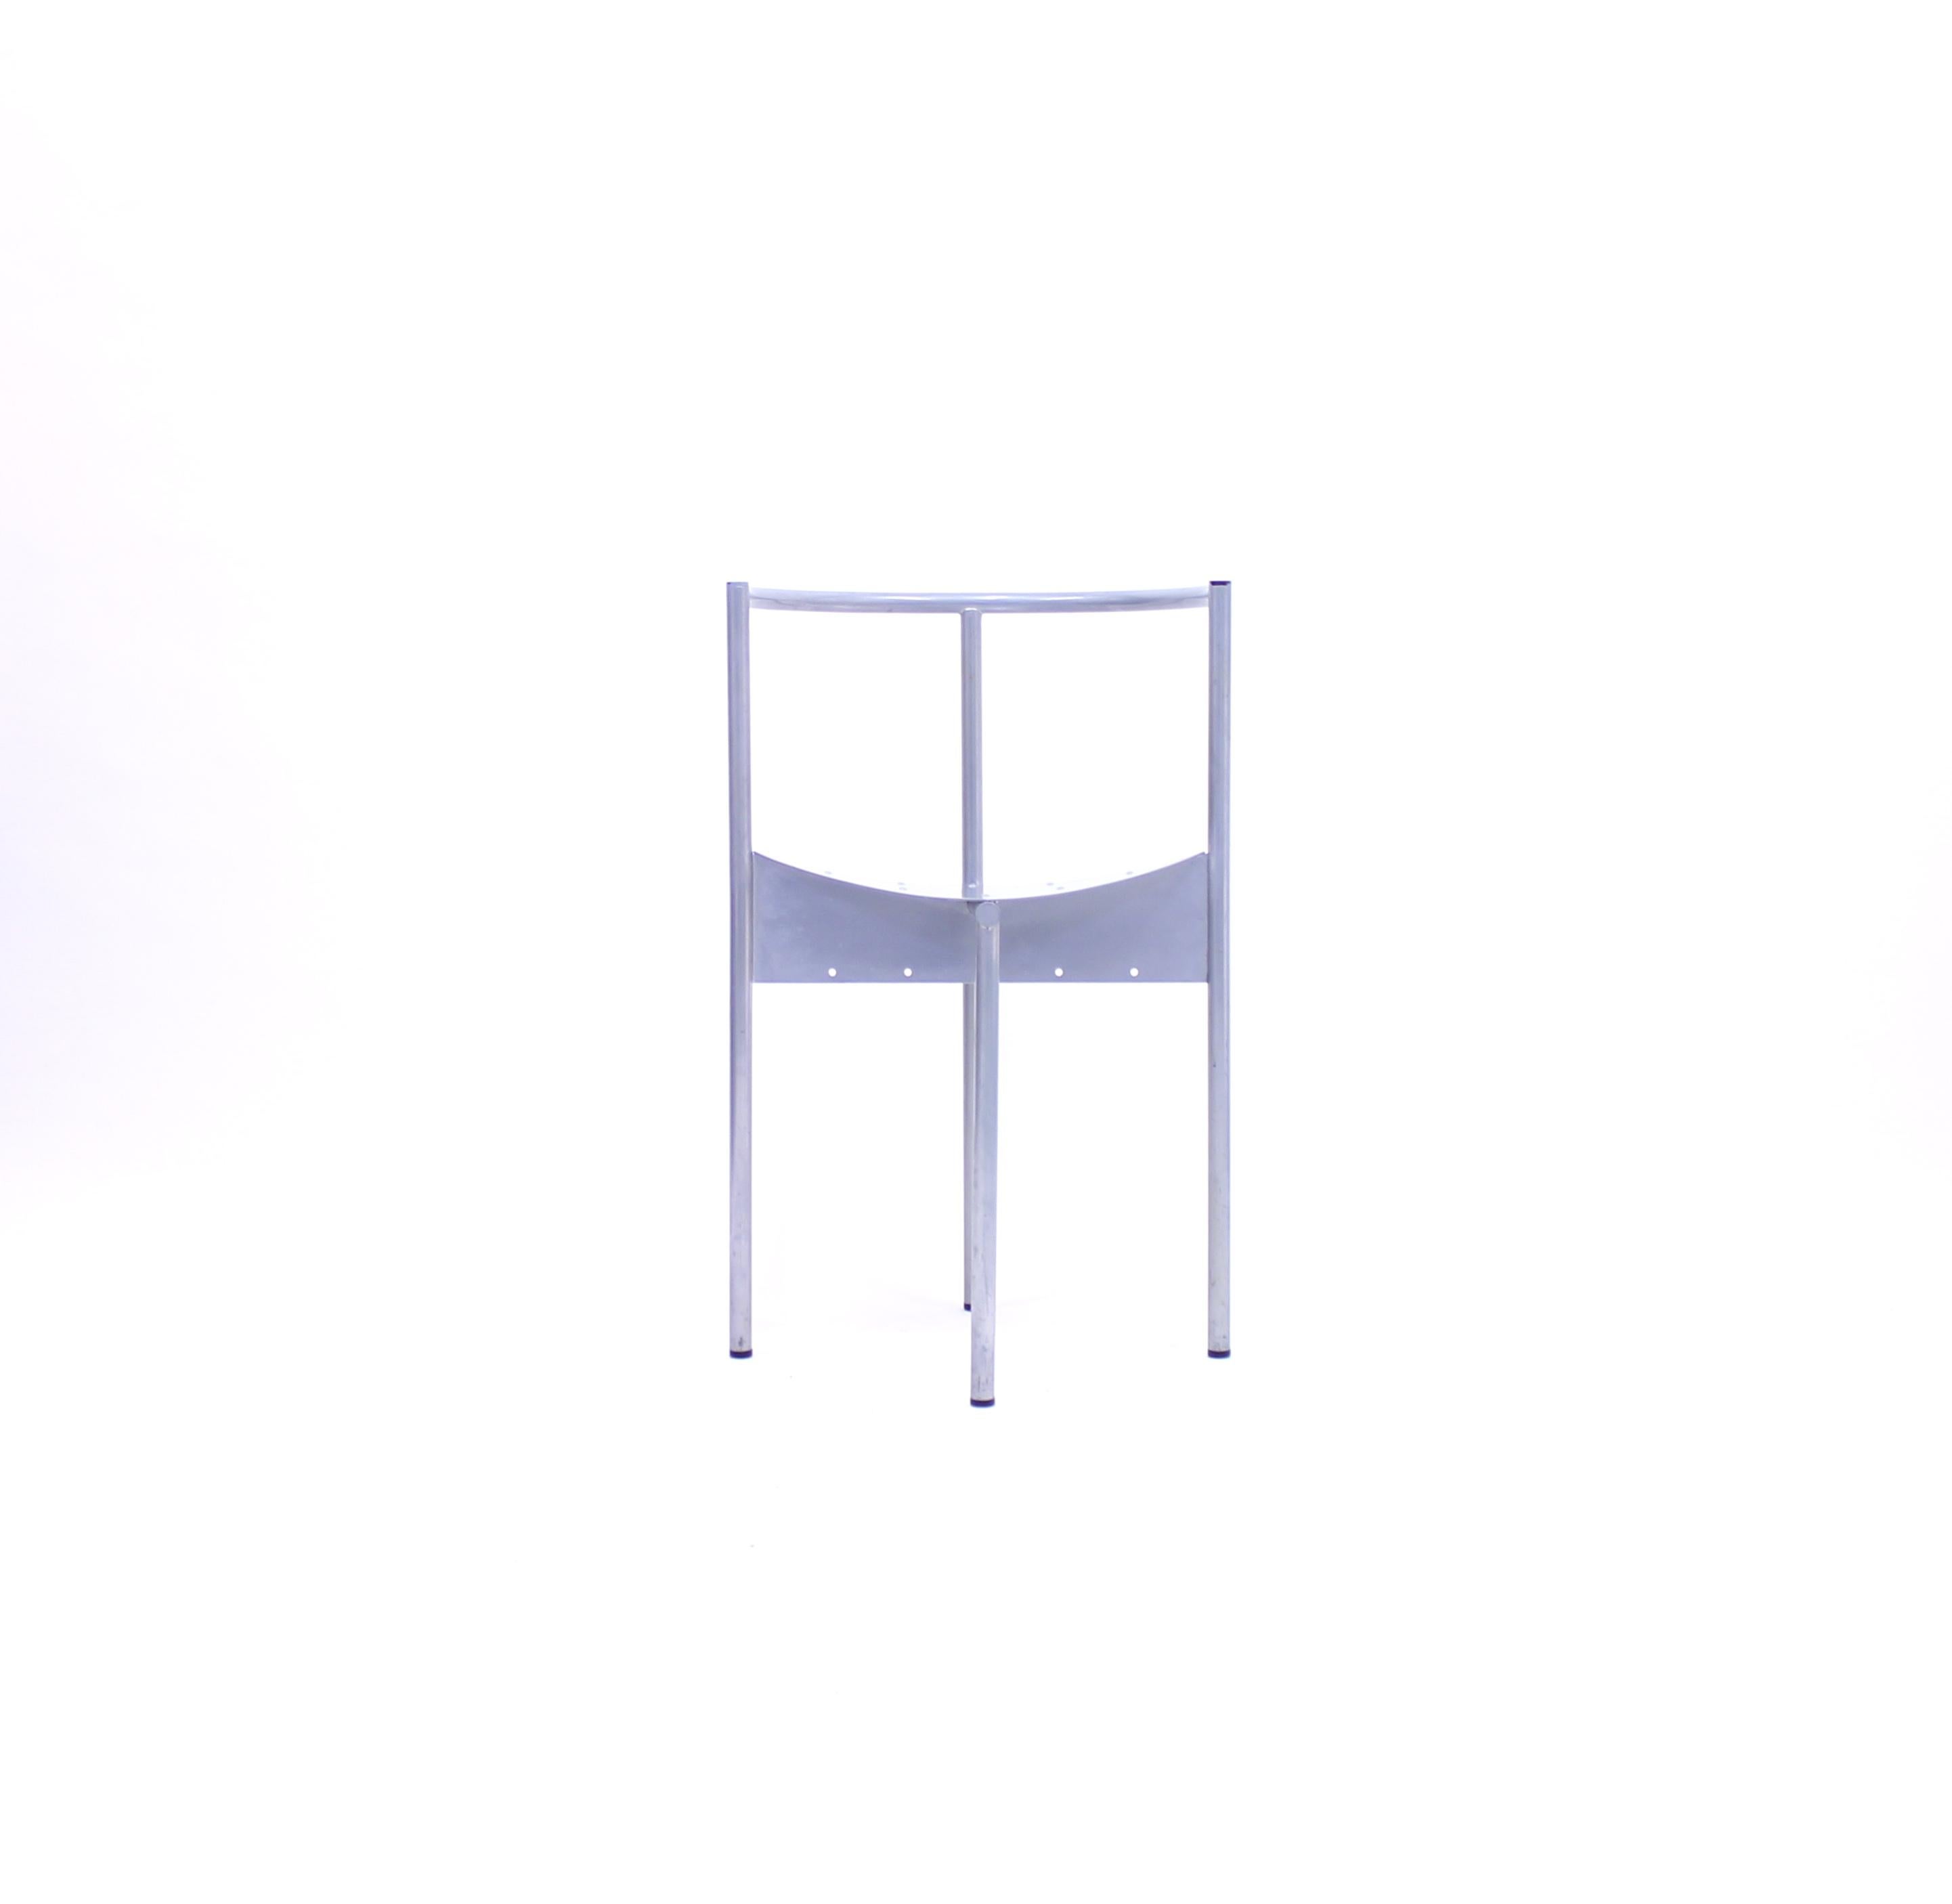 Philippe Starck, Wendy Wright Chair, Disform, 1986 1